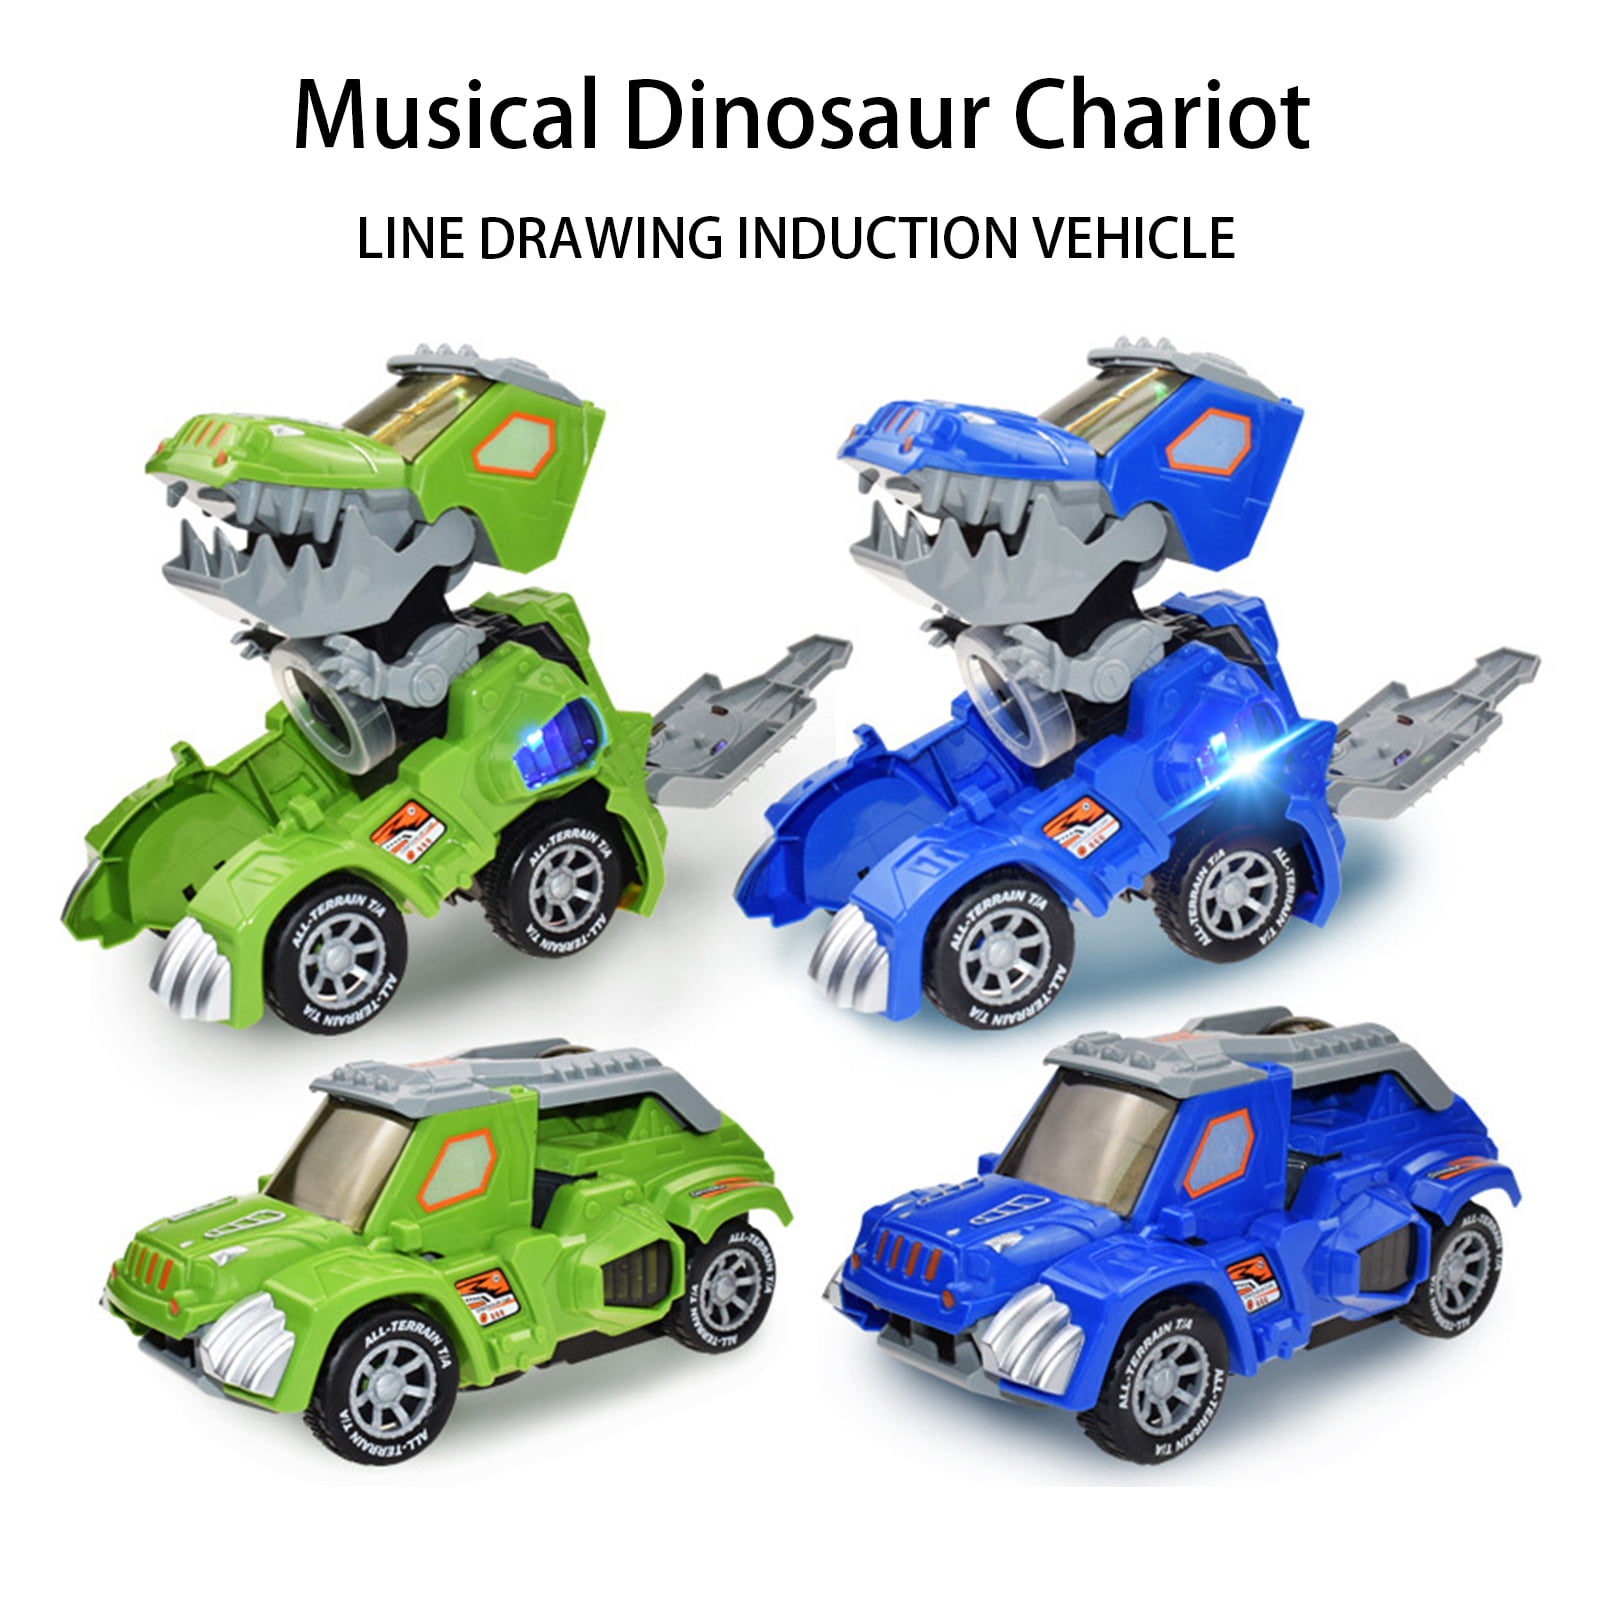 Dinosaur Chariot Electric Deformation LED Car Model w/LED Headlight Gift Toy 